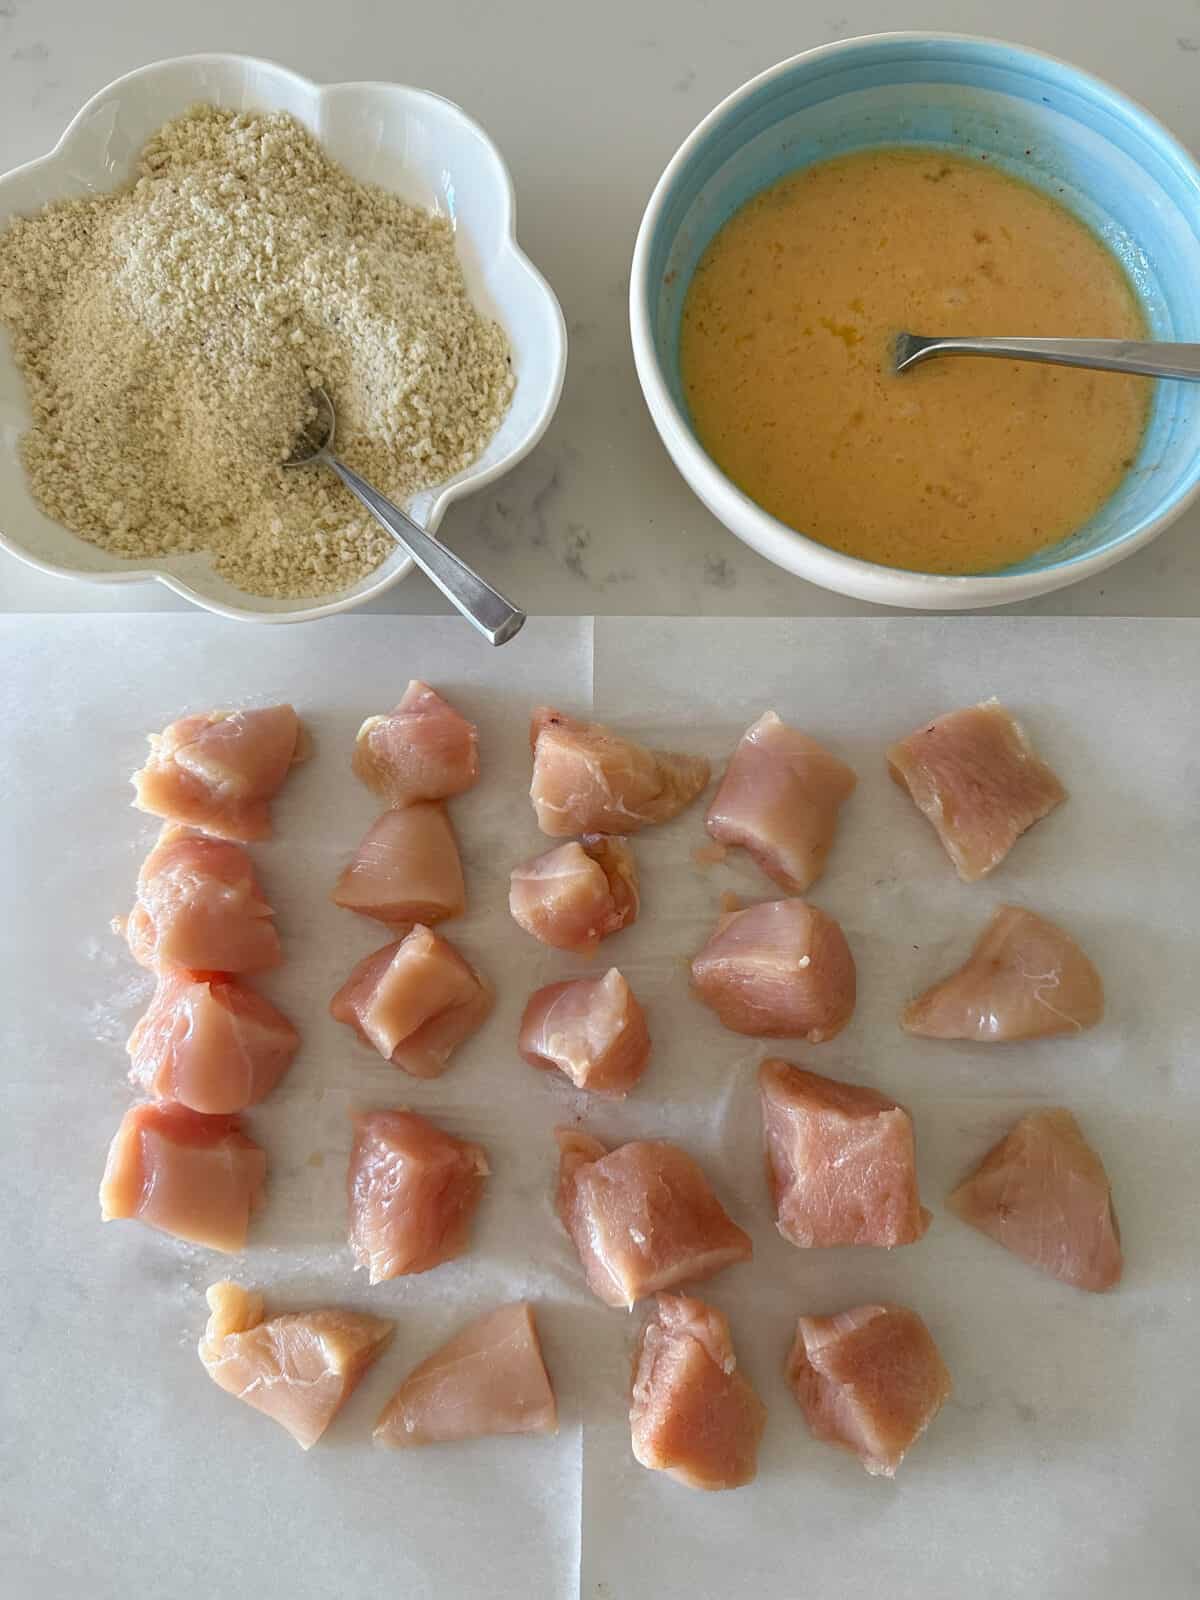 chicken breast cut into cubes ready for egg dip and panko coating